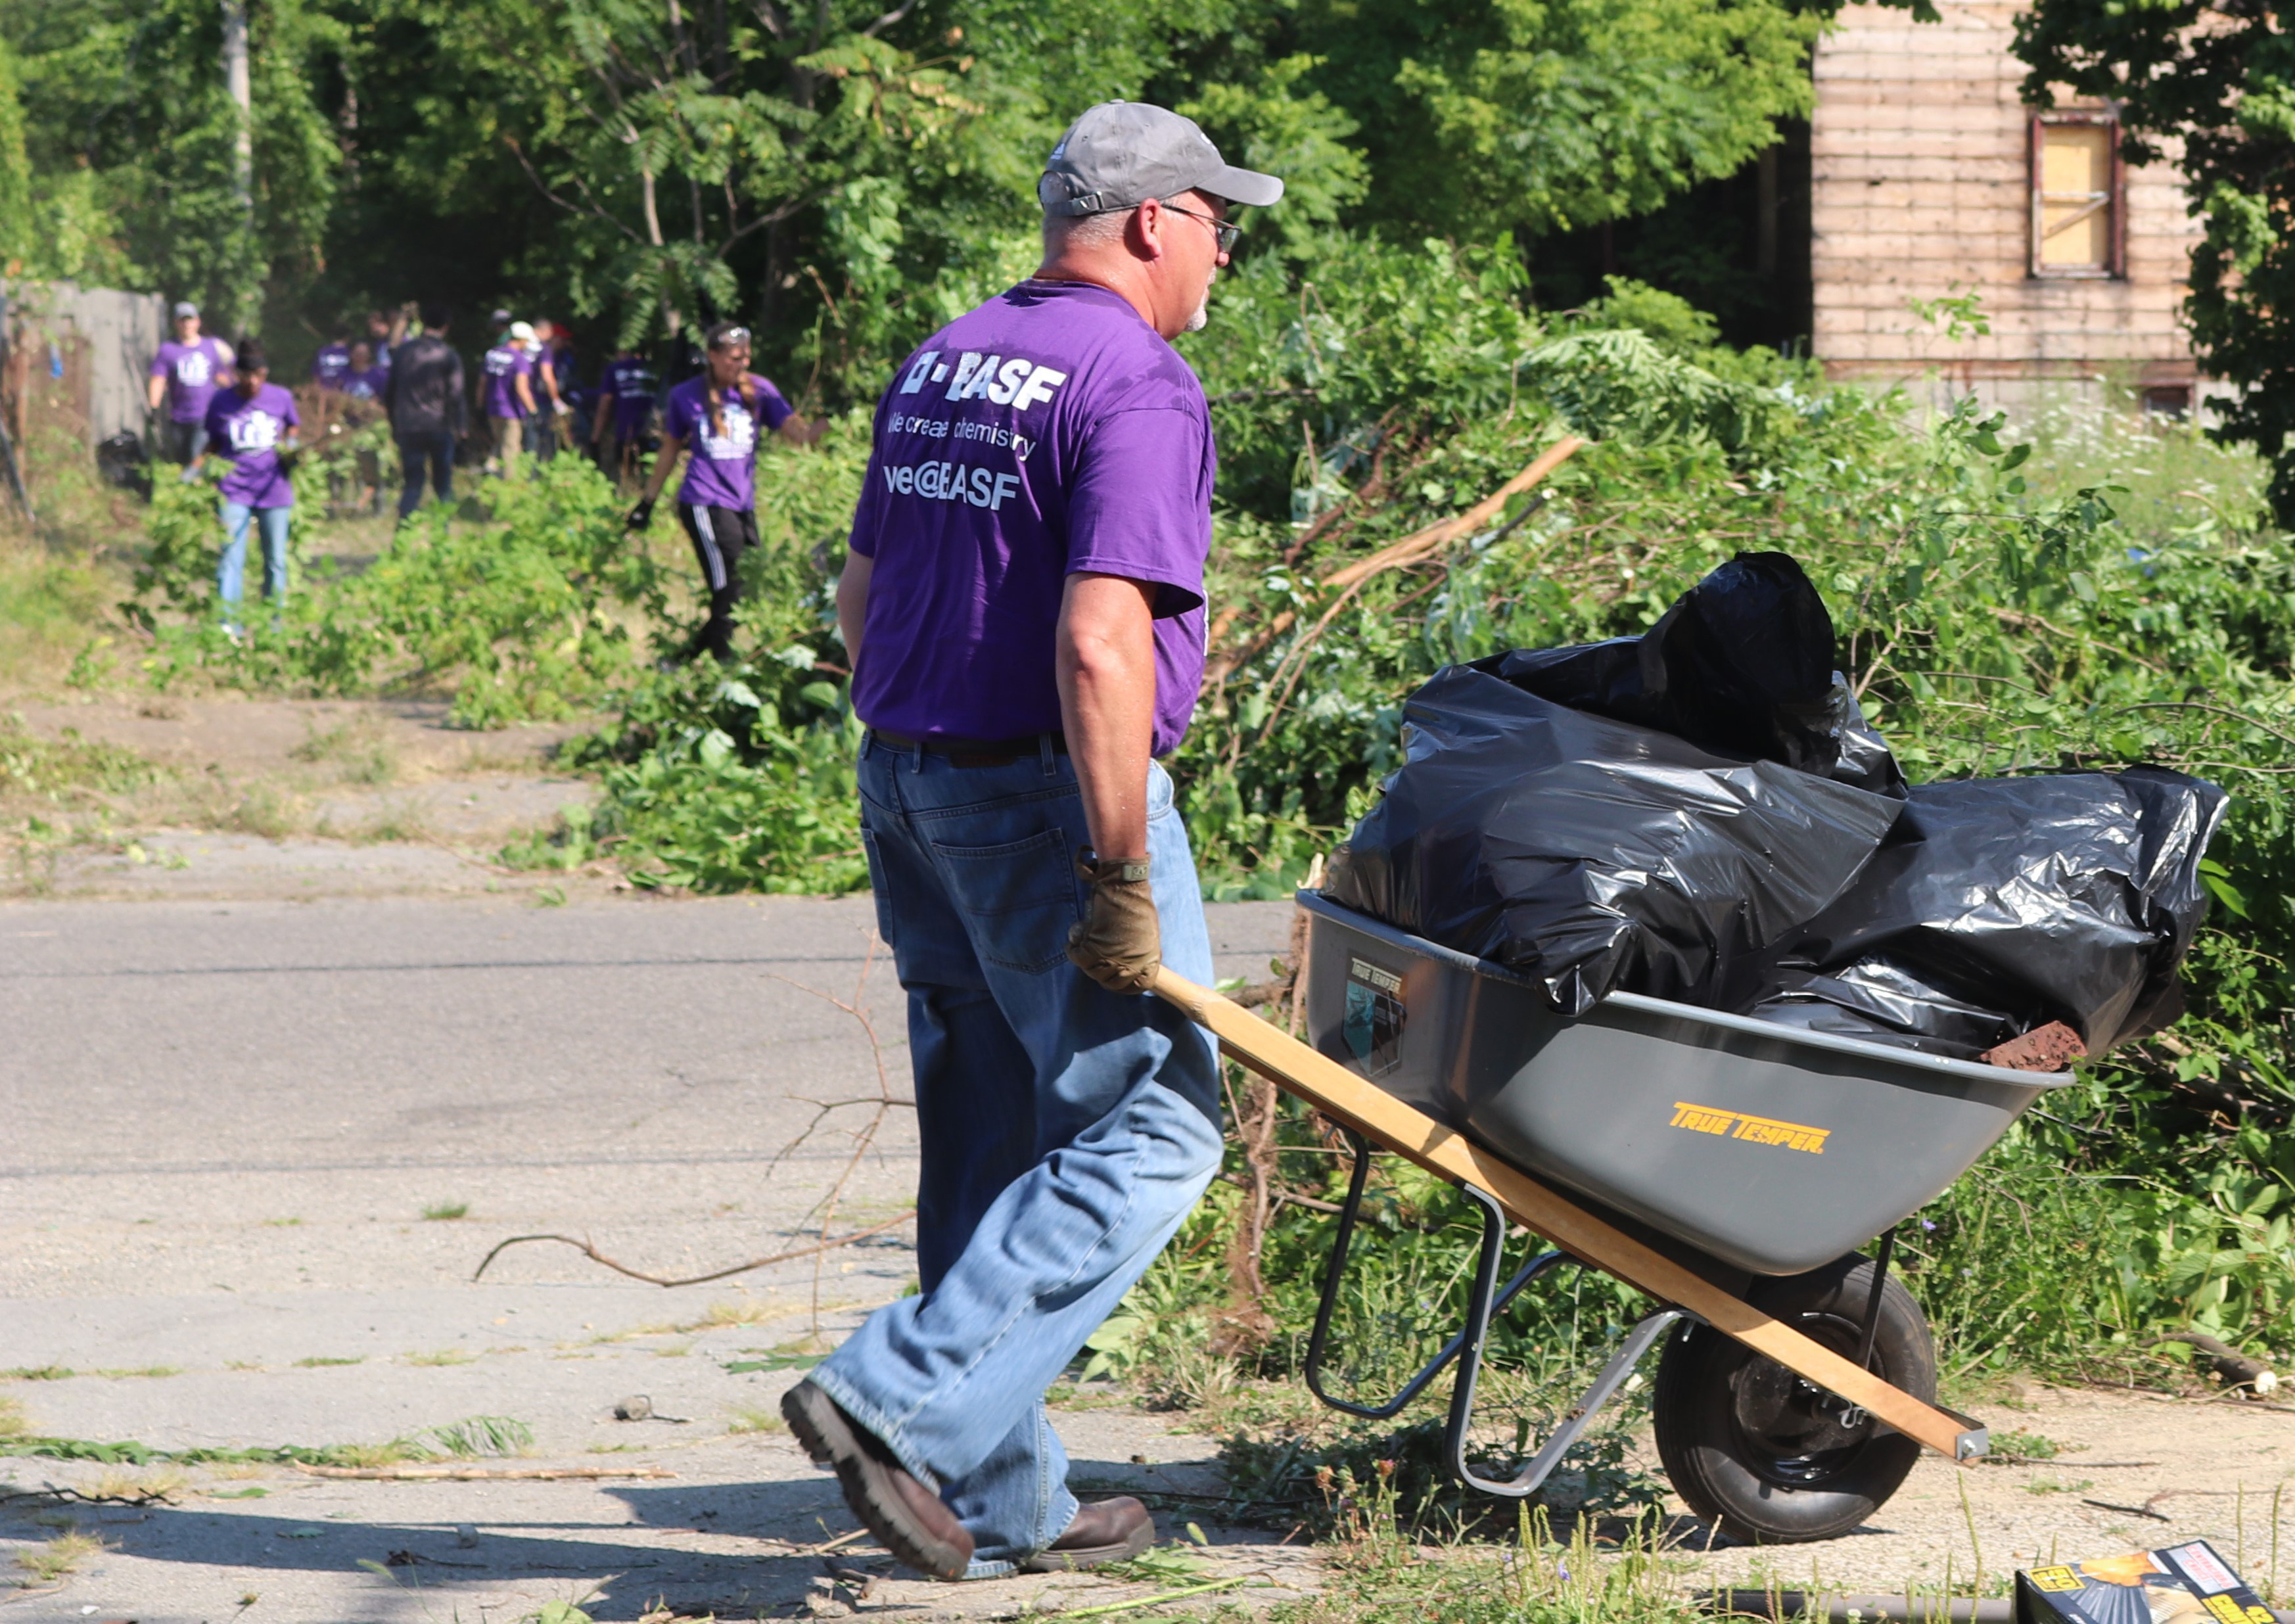 Detroit Community Benefits From Support Of Basf Volunteers And 50 000 Contribution